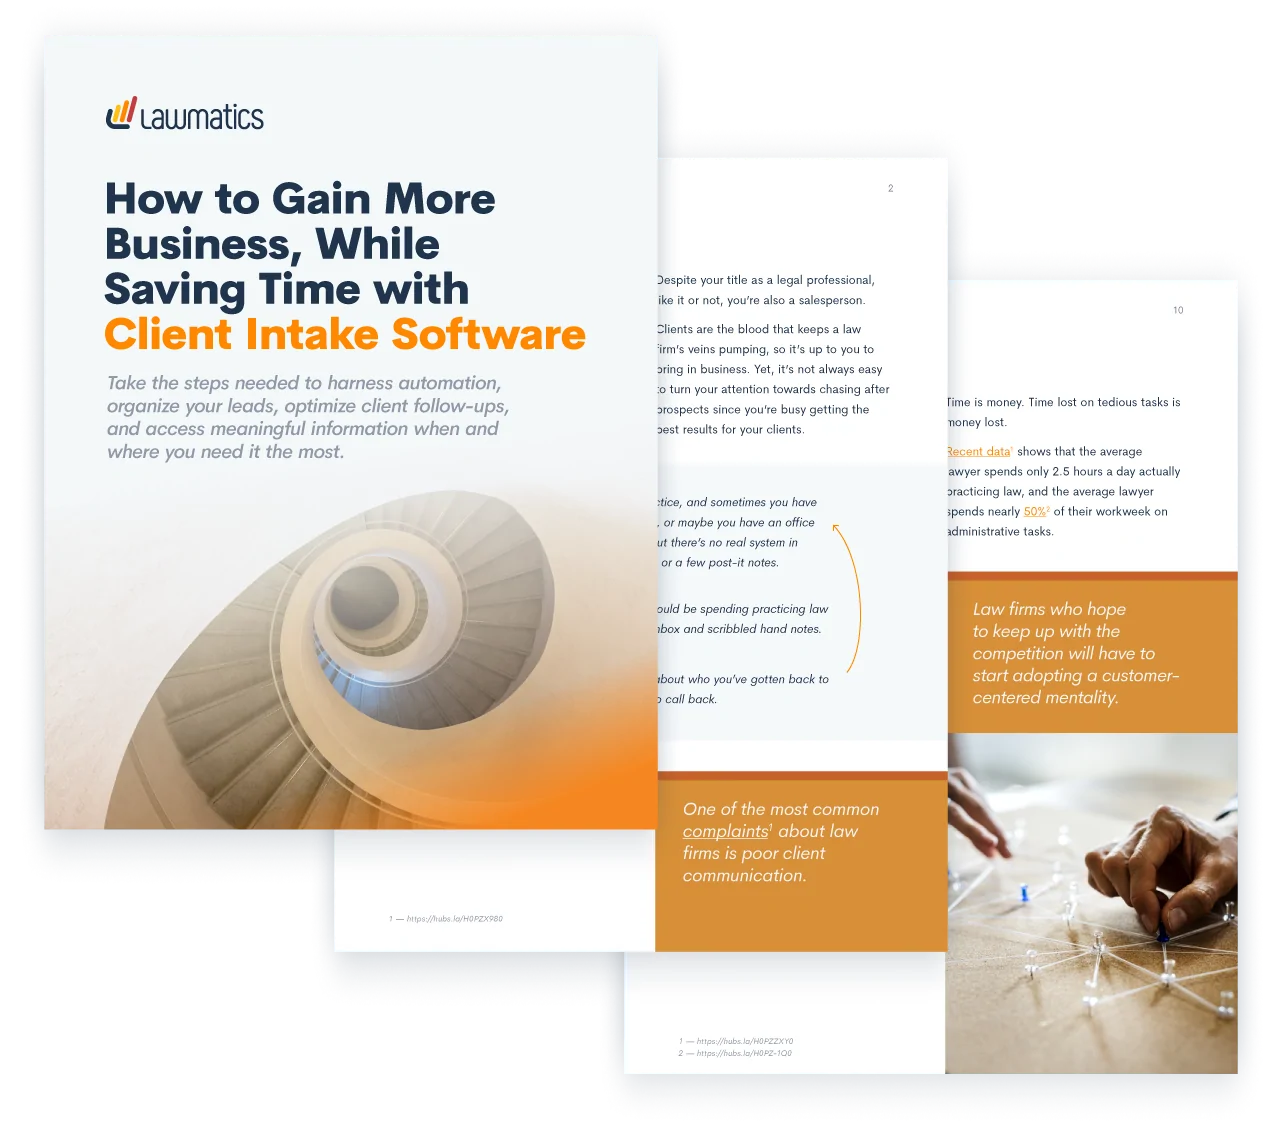 How to Gain More Business, While Saving Time with Client Intake Software